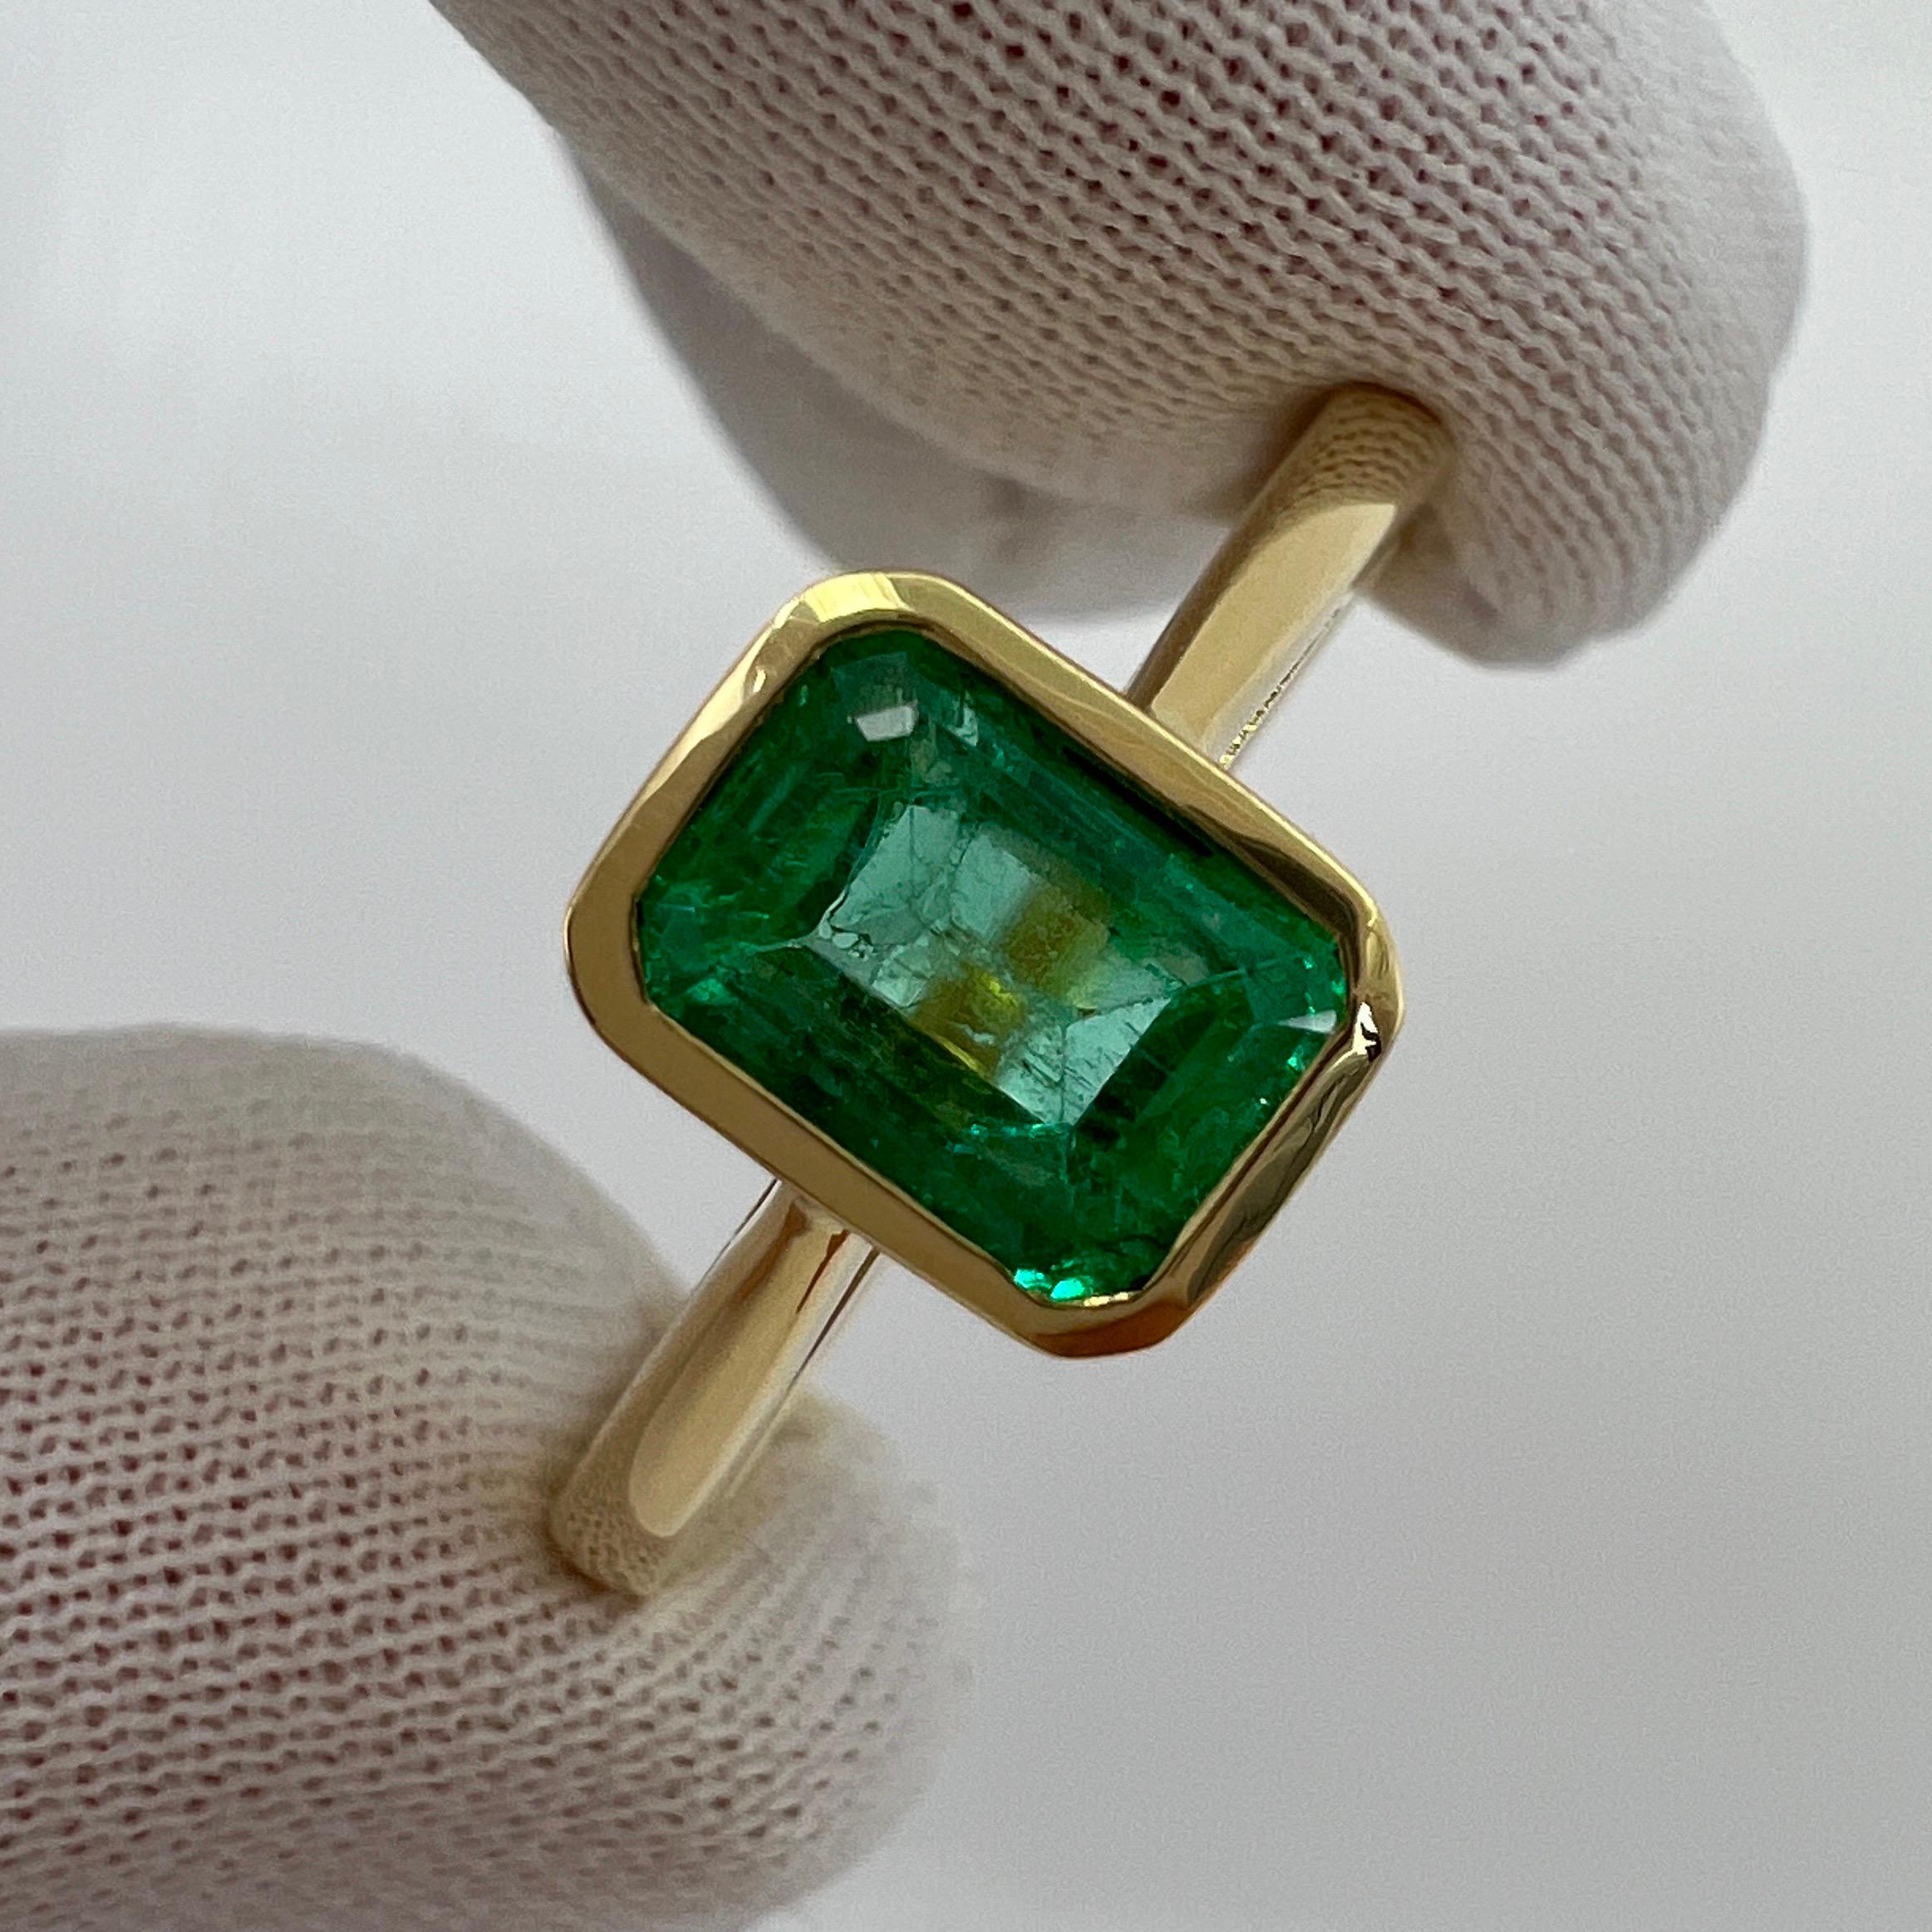 GIA Certified Vivid Green 1.50ct Colombian Emerald 18k Yellow Gold Solitaire Ring

1.50 Carat Colombian emerald with a stunning vivid green colour and good clarity. Some small natural inclusions, as to be expected with natural emeralds, but a clean